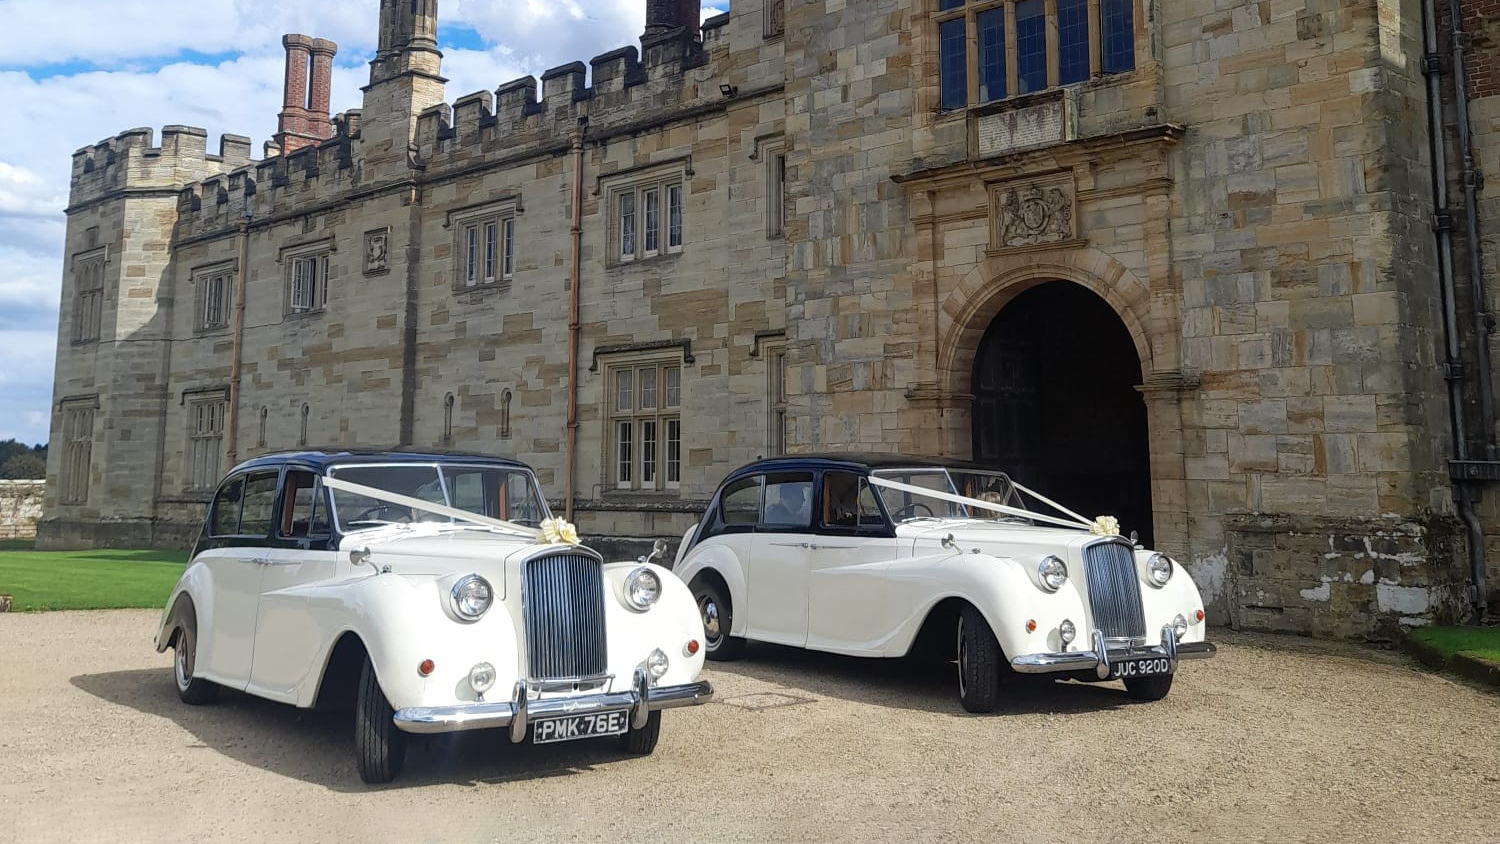 Two Classic Austin Princess Limousine decorated with Ivory Ribbons and Bows on top of the front grill. Vehicles are parked in front of a large manor house in Sevenoaks